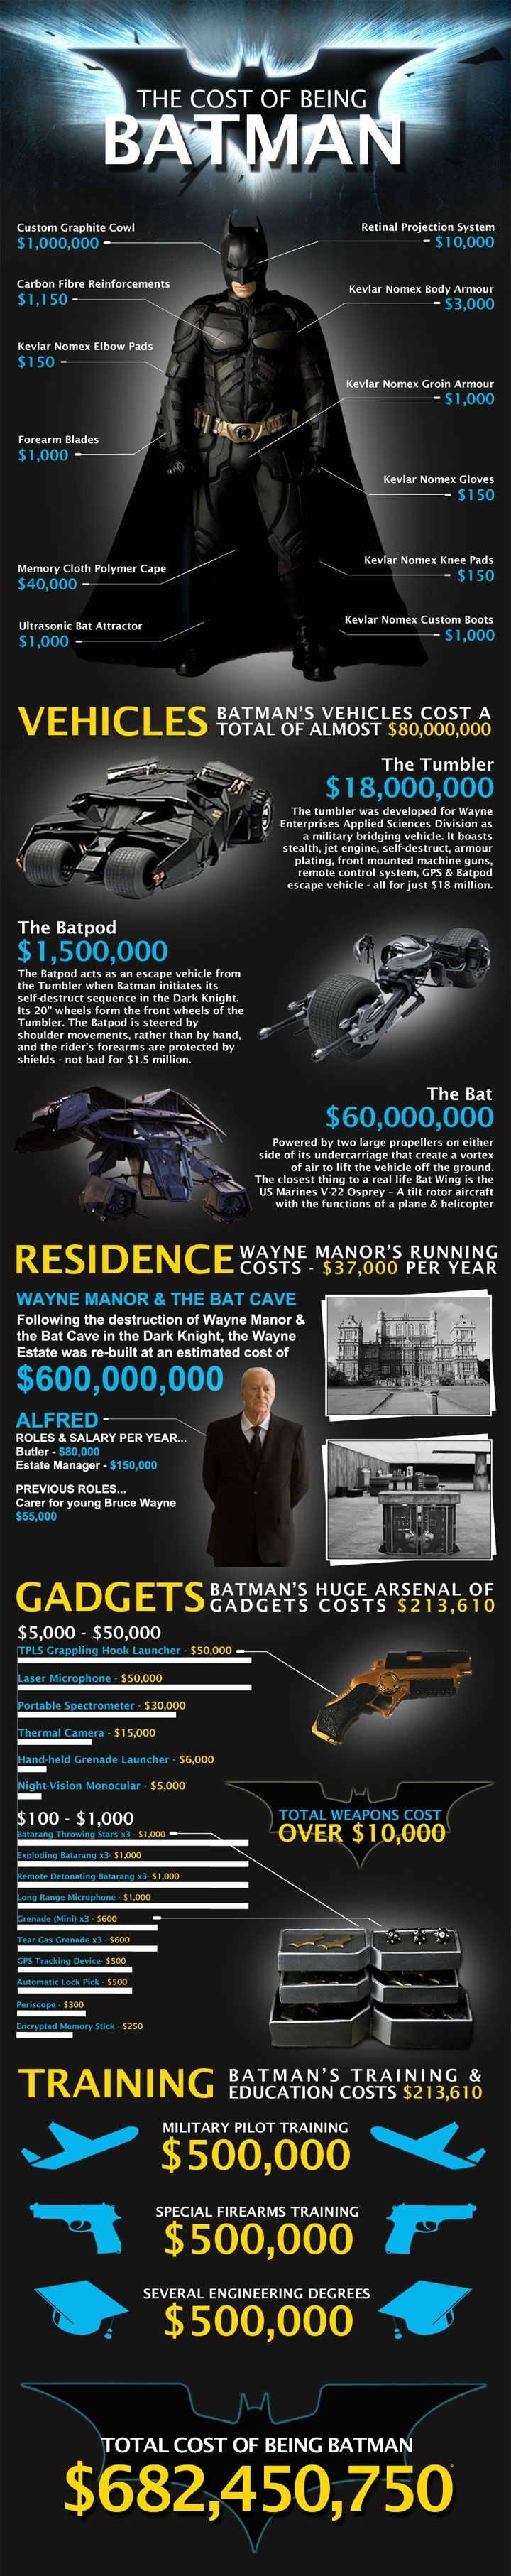 total cost of being batman